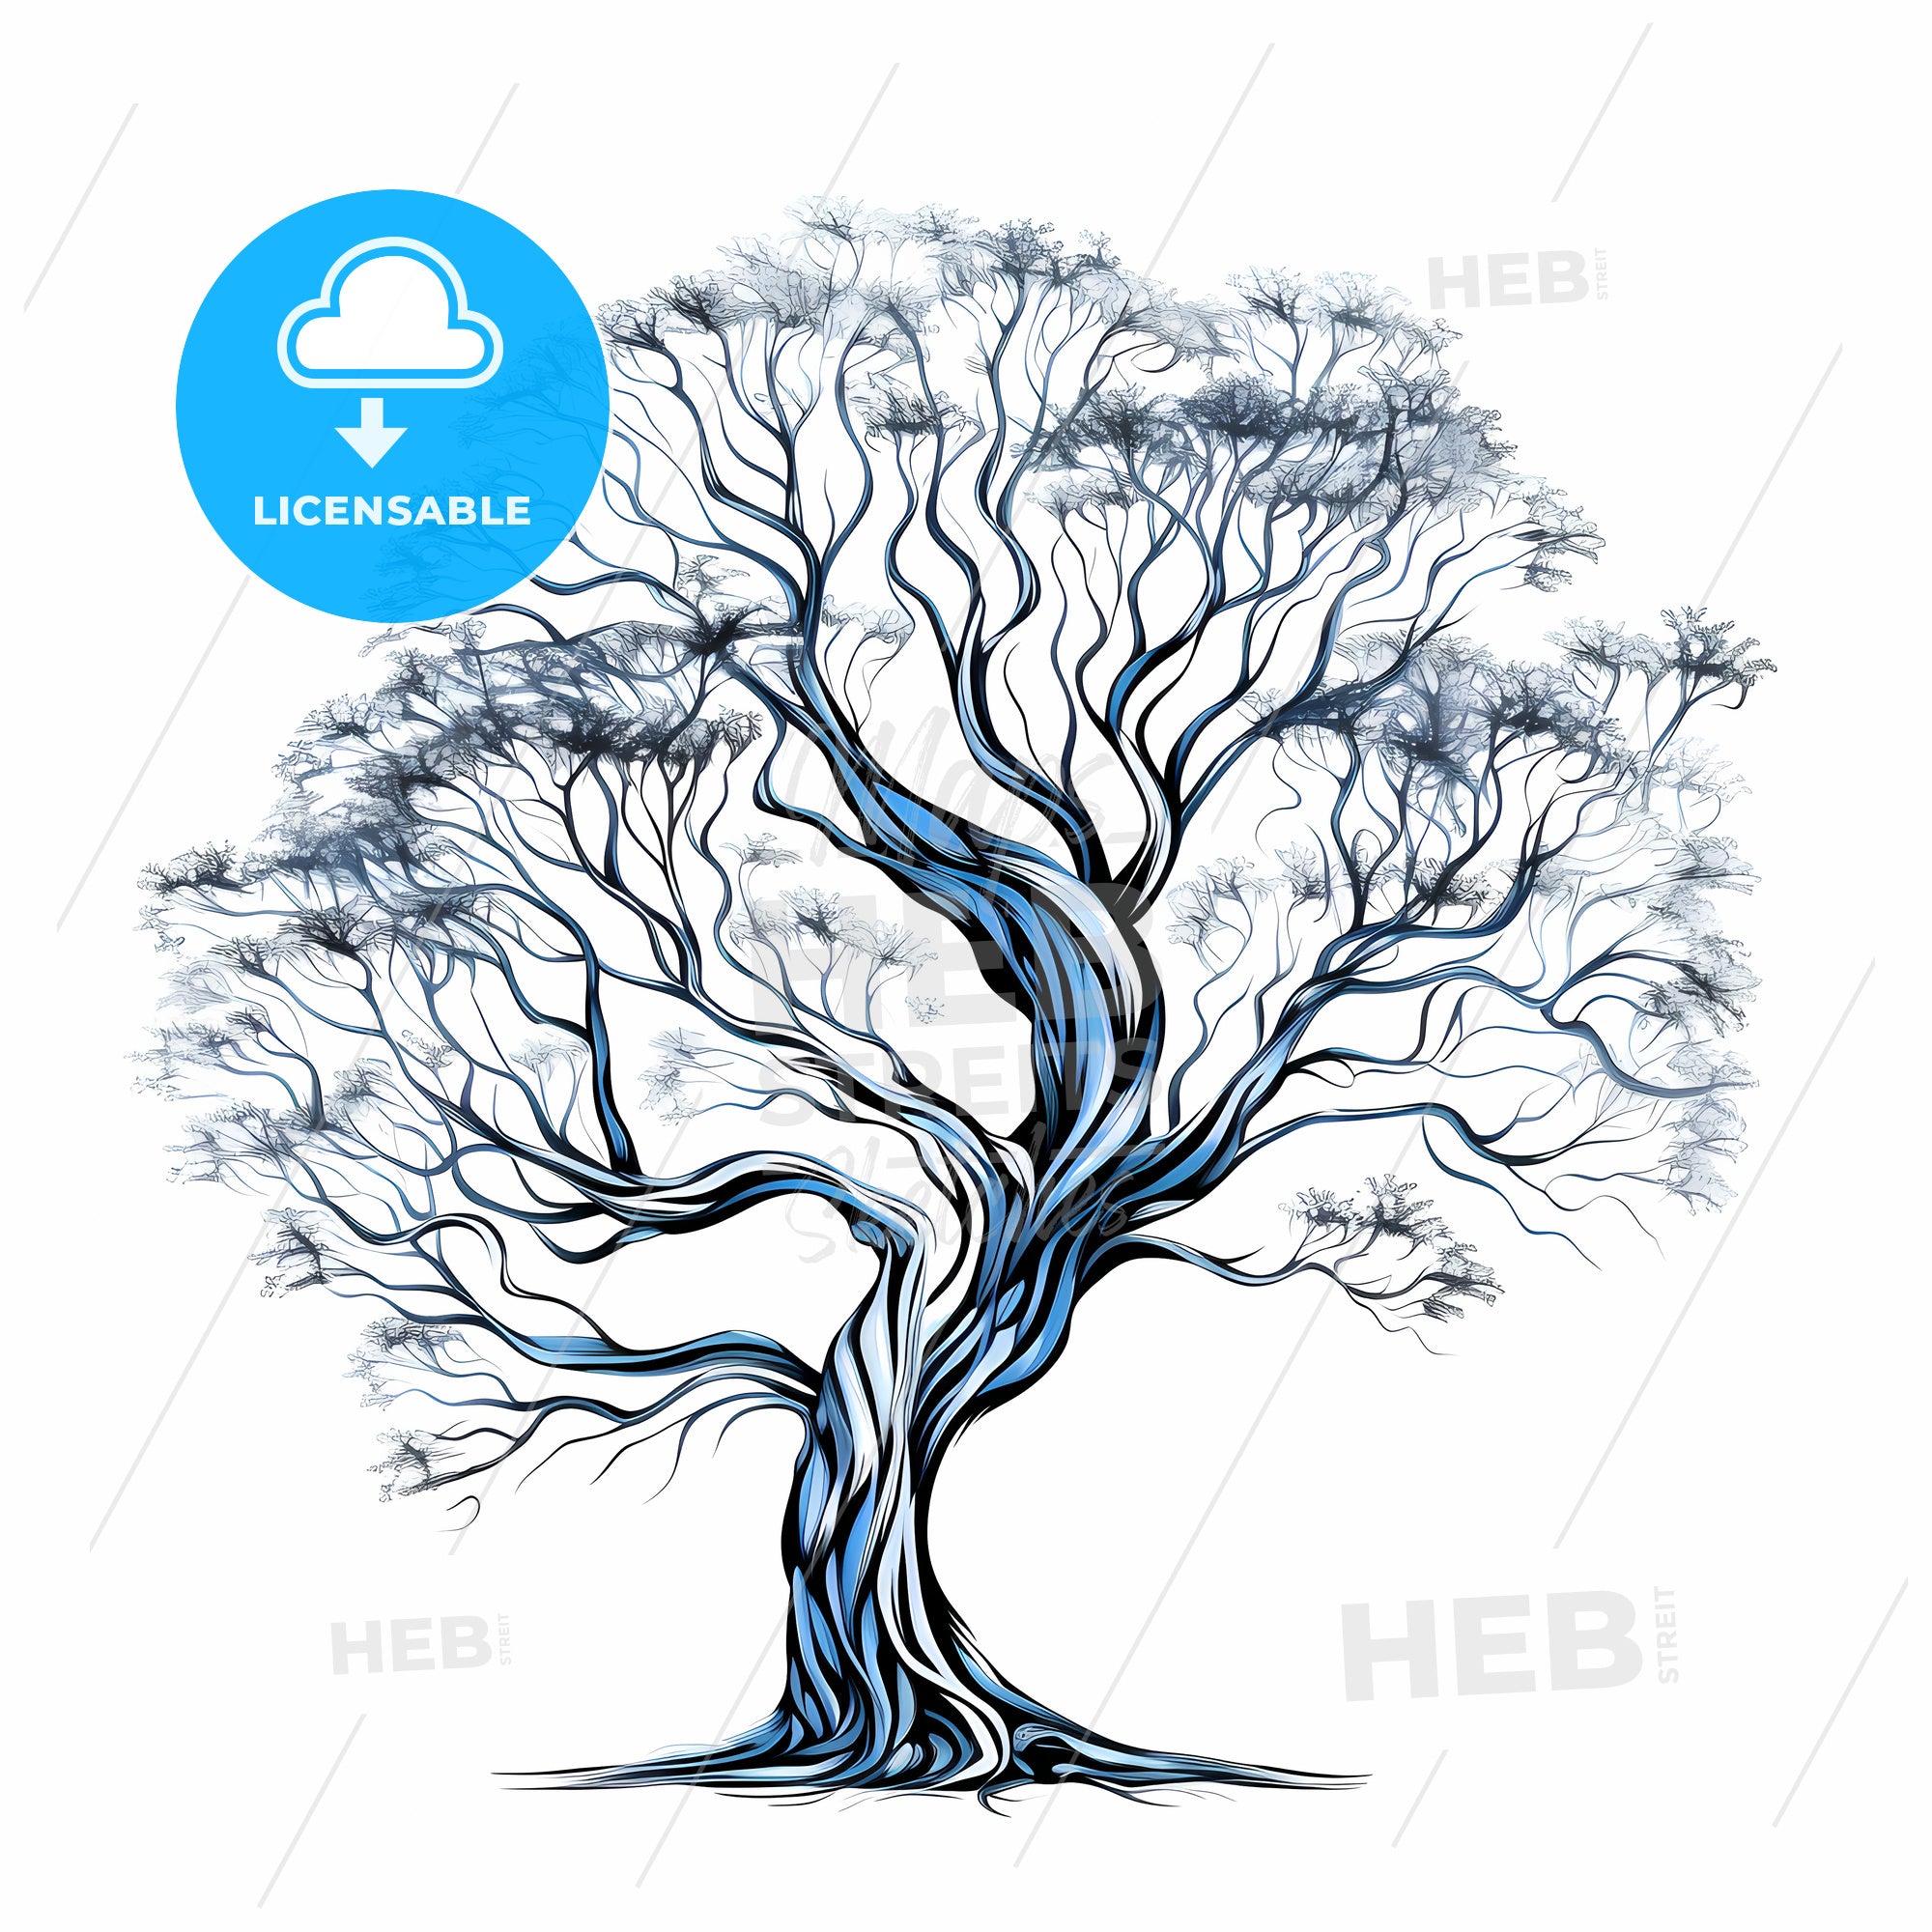 Old tree with no leaves Drawing by Mike M Burke - Pixels